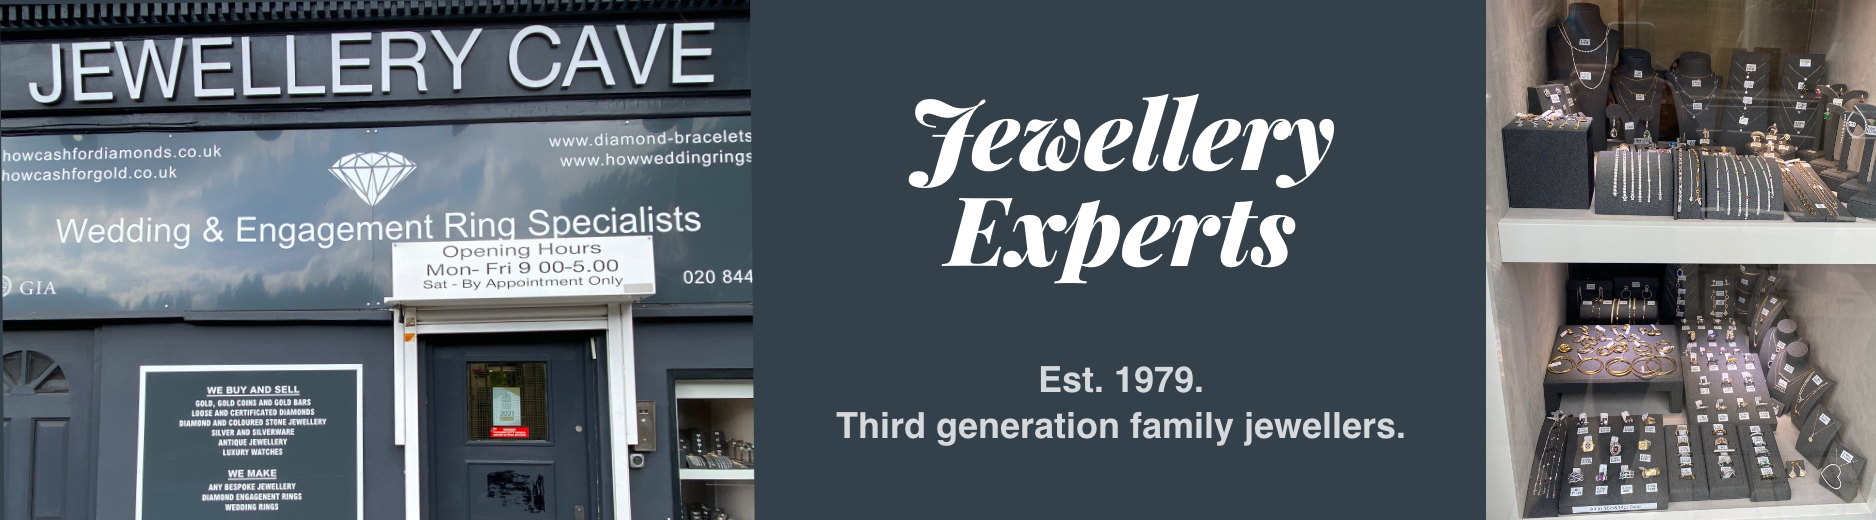 Jewellery Experts - Est 1979. Third generation family jewellers.